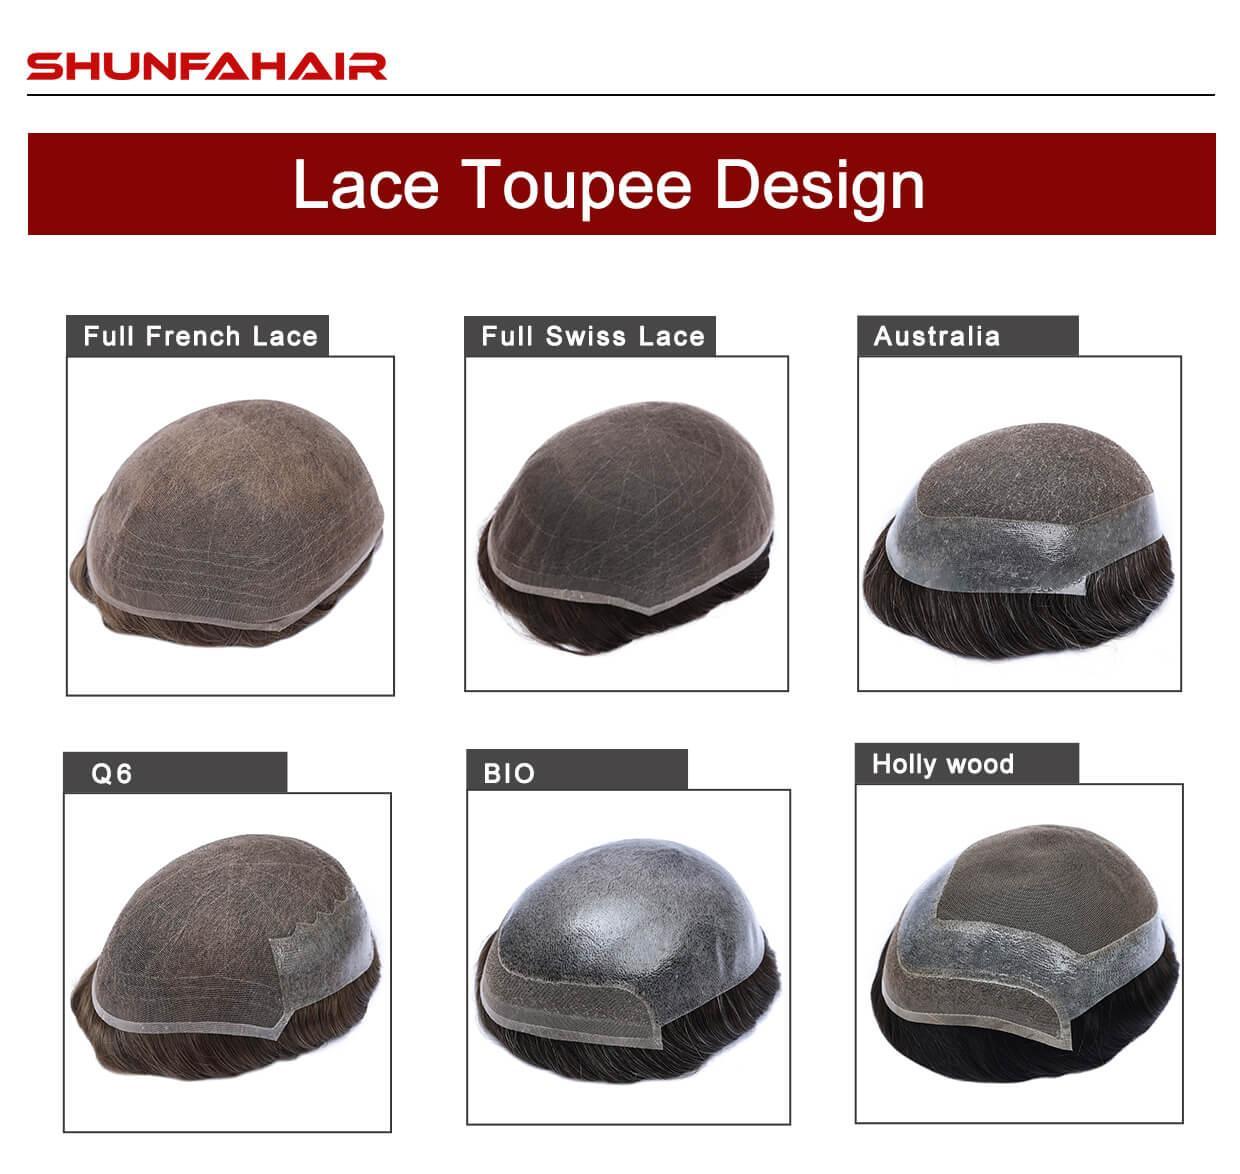 Lace TOUPEE design from shunfahair.jpg